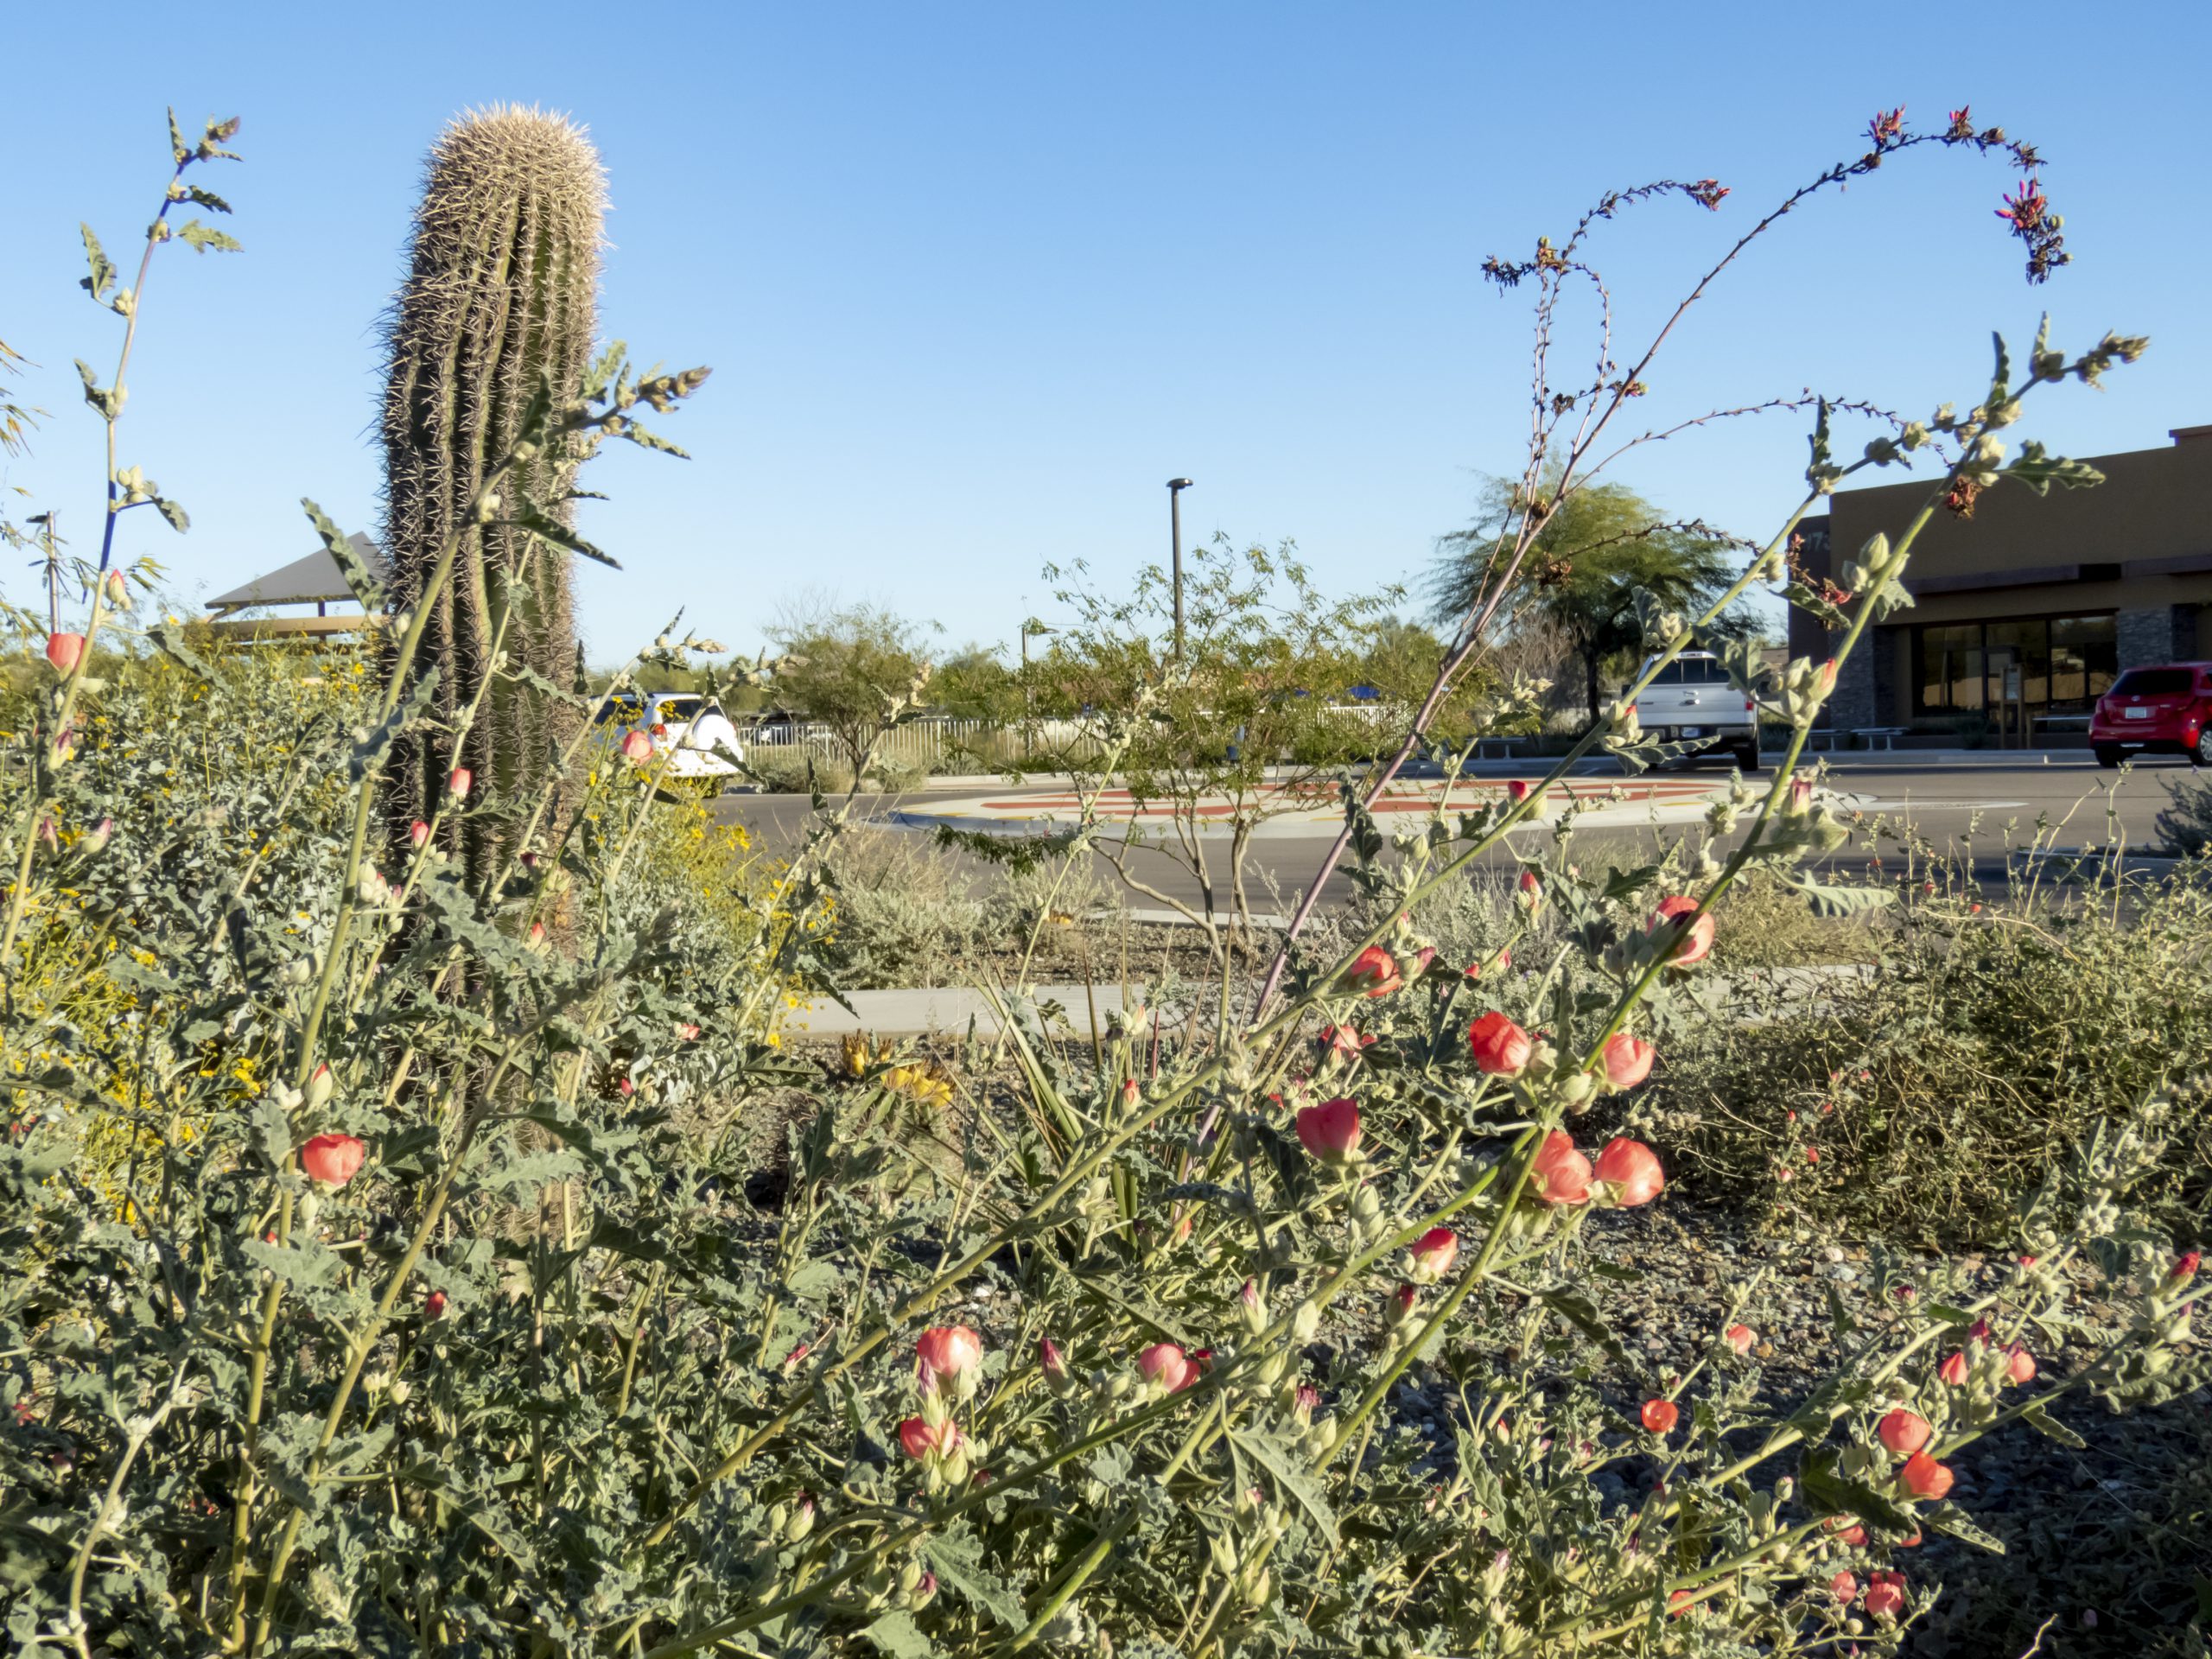 Native cacti, flowering shrubs, and succulents cluster together